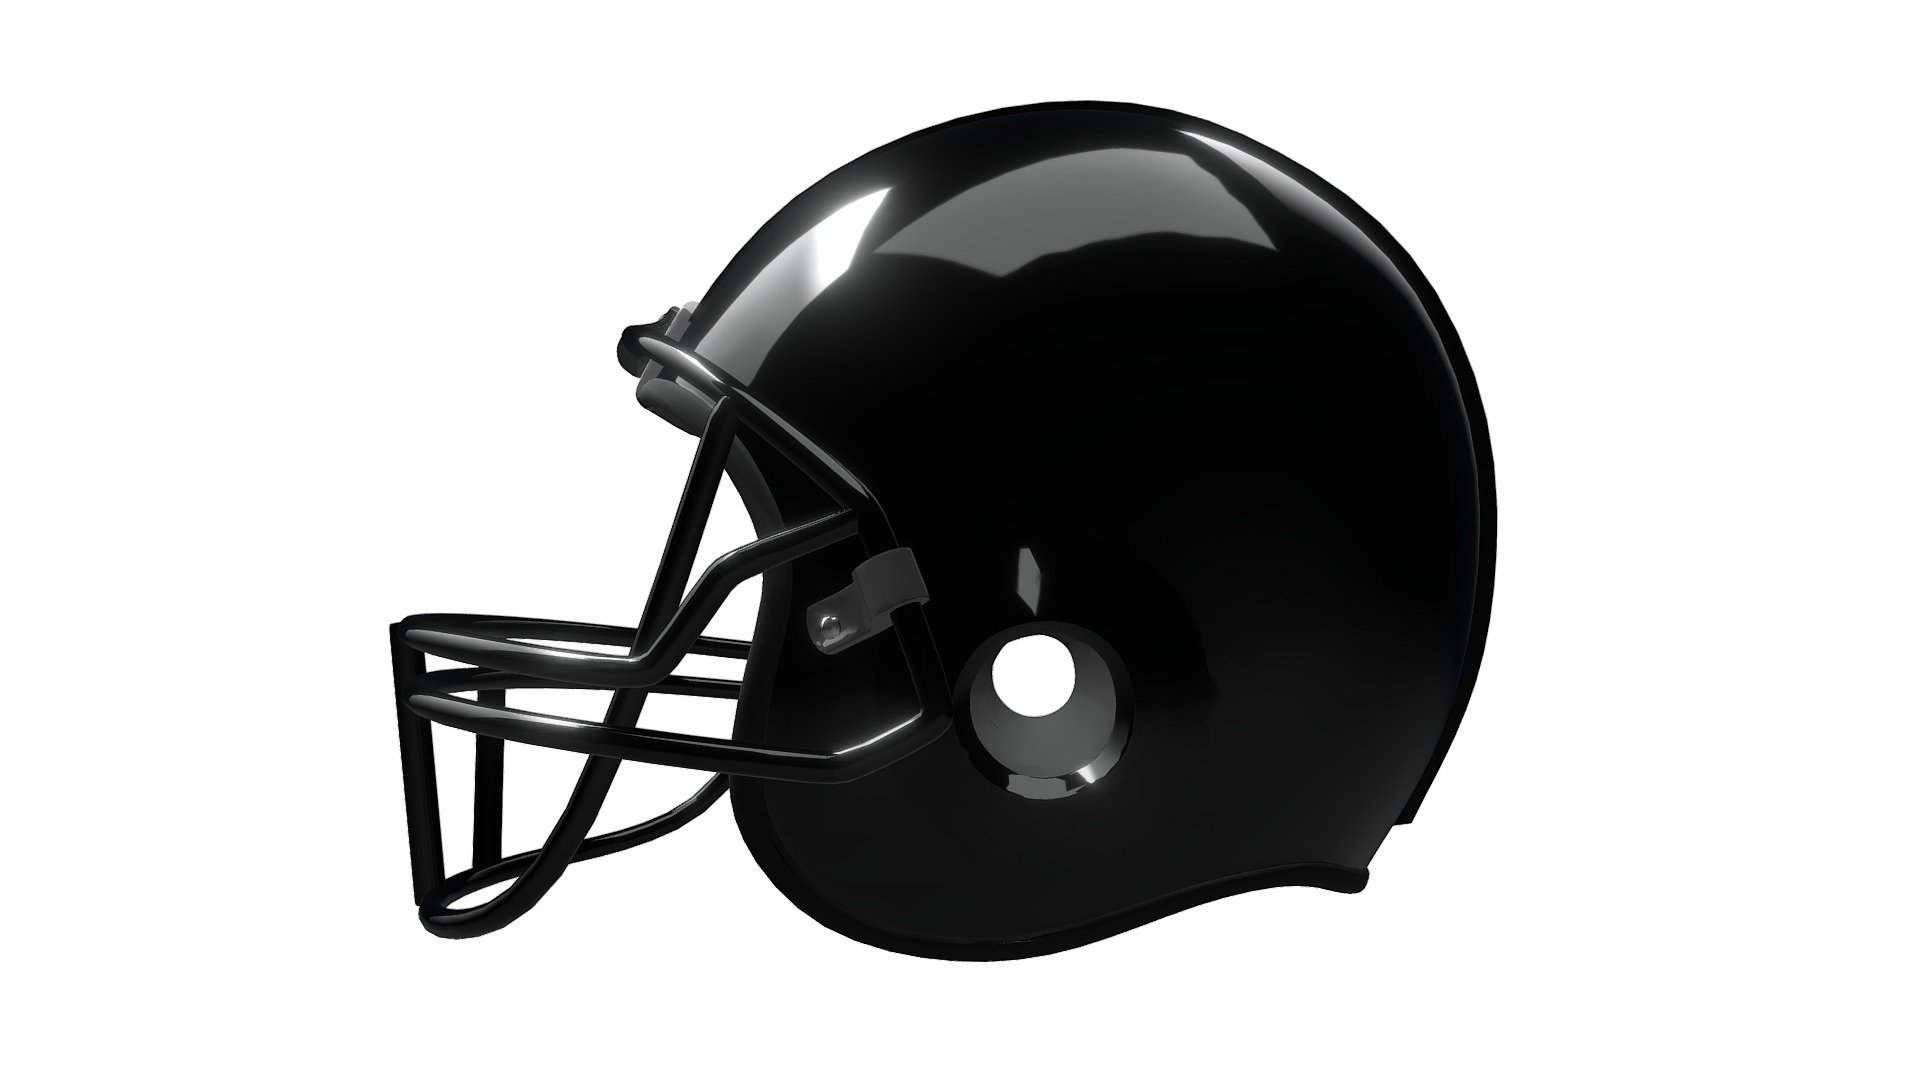 As I play Gridiron here in Australia, I thought I would bring you a model of a simple standard Riddell Football Helmet.
Let me know what you think 3d model